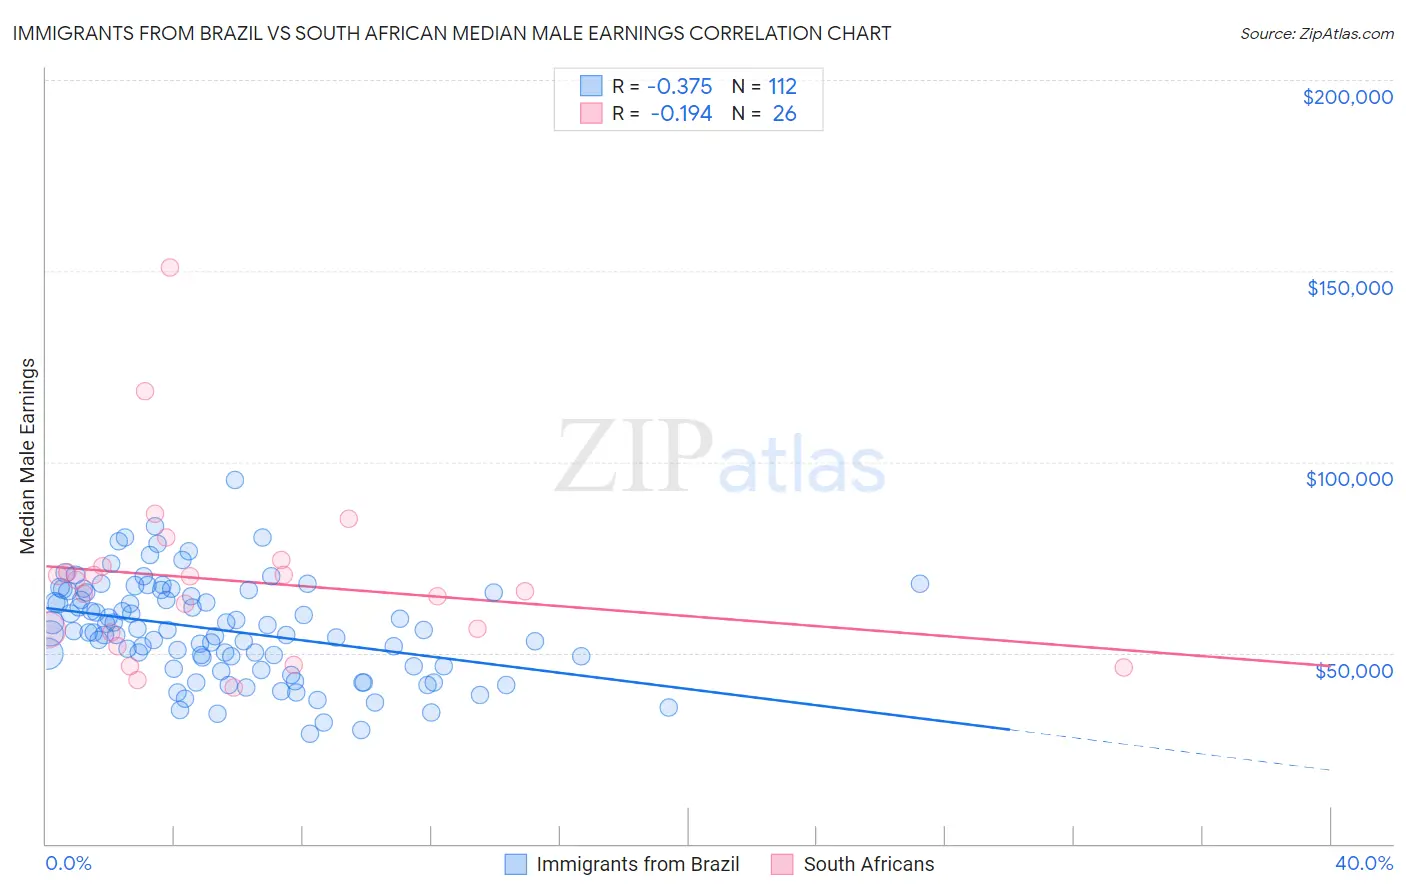 Immigrants from Brazil vs South African Median Male Earnings